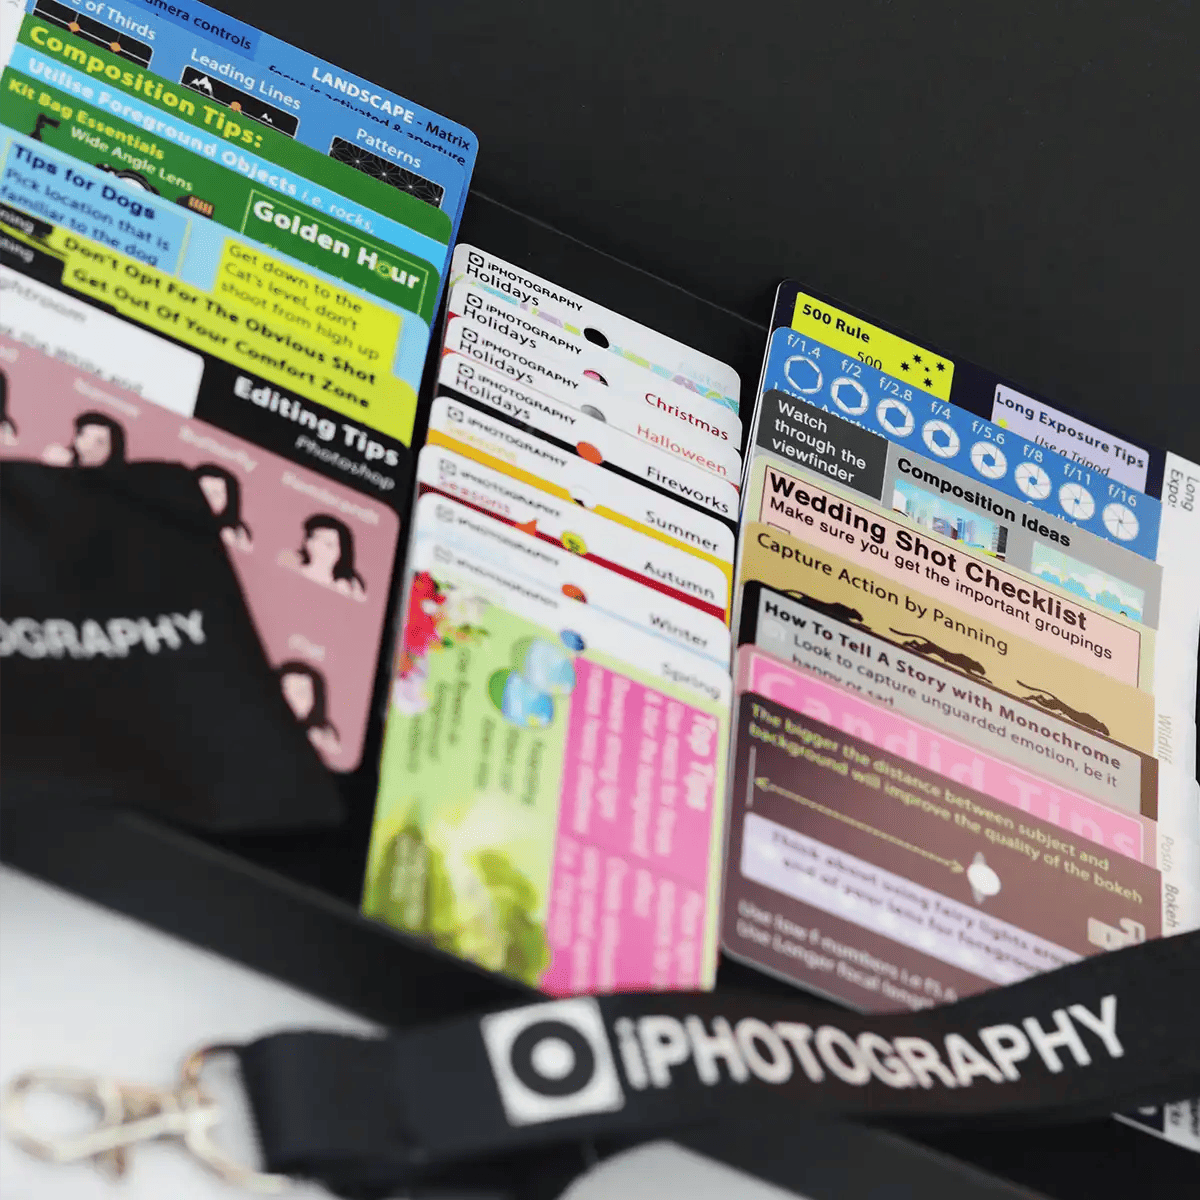 a photo of the iphotography flip cards in a presentation box